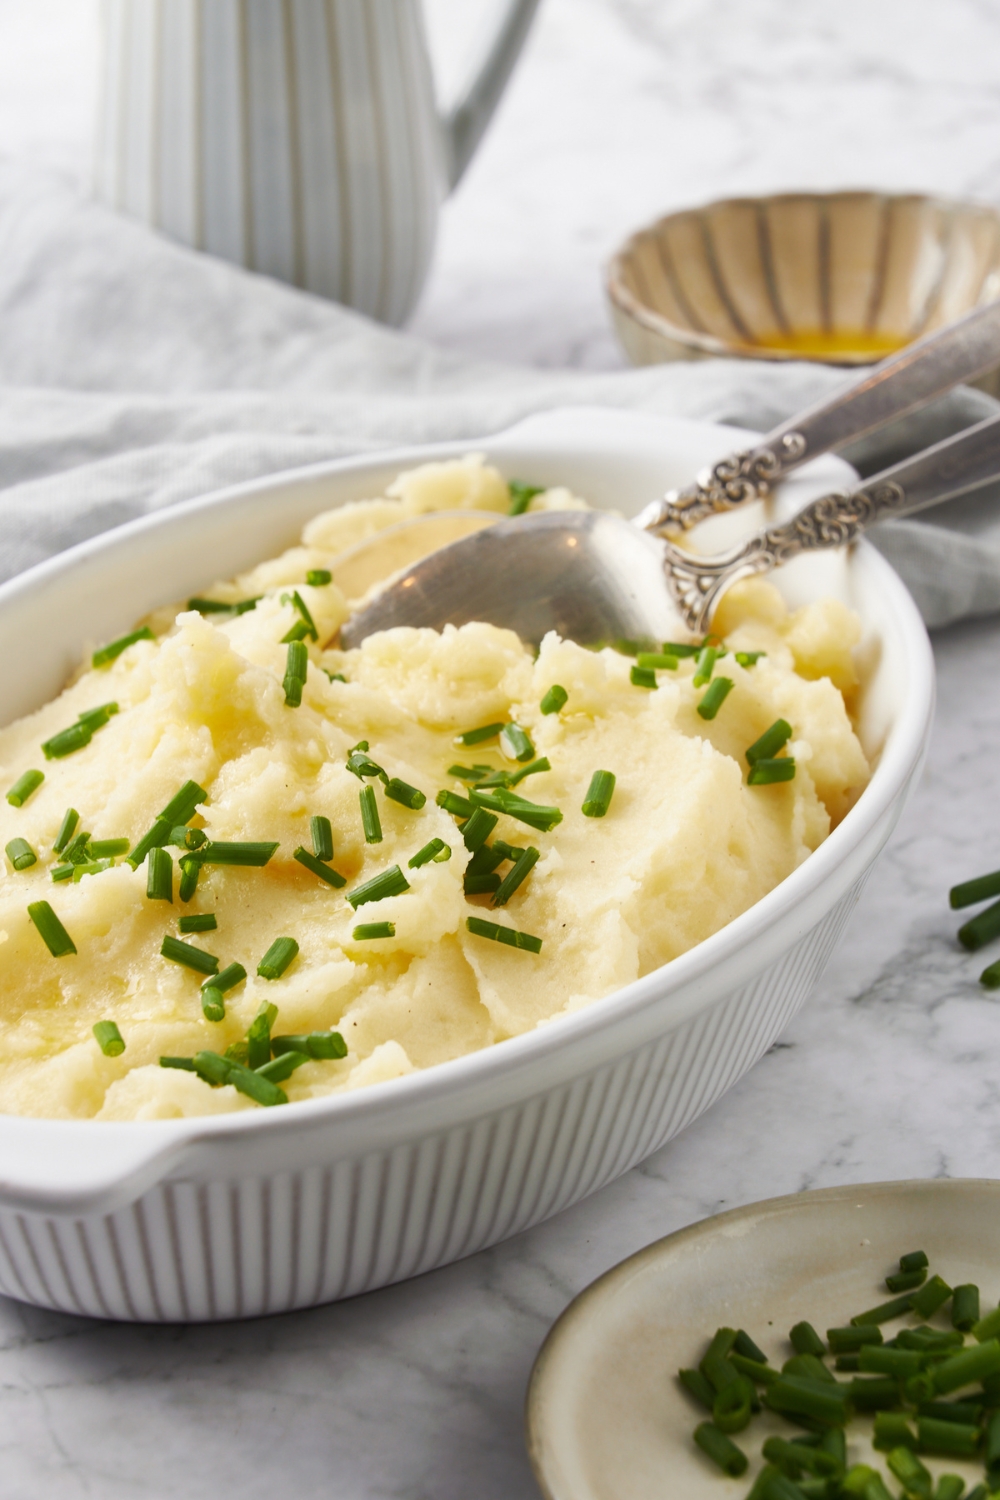 A white baking dish filled with mashed potatoes, two serving spoons, and fresh chives garnished on top.